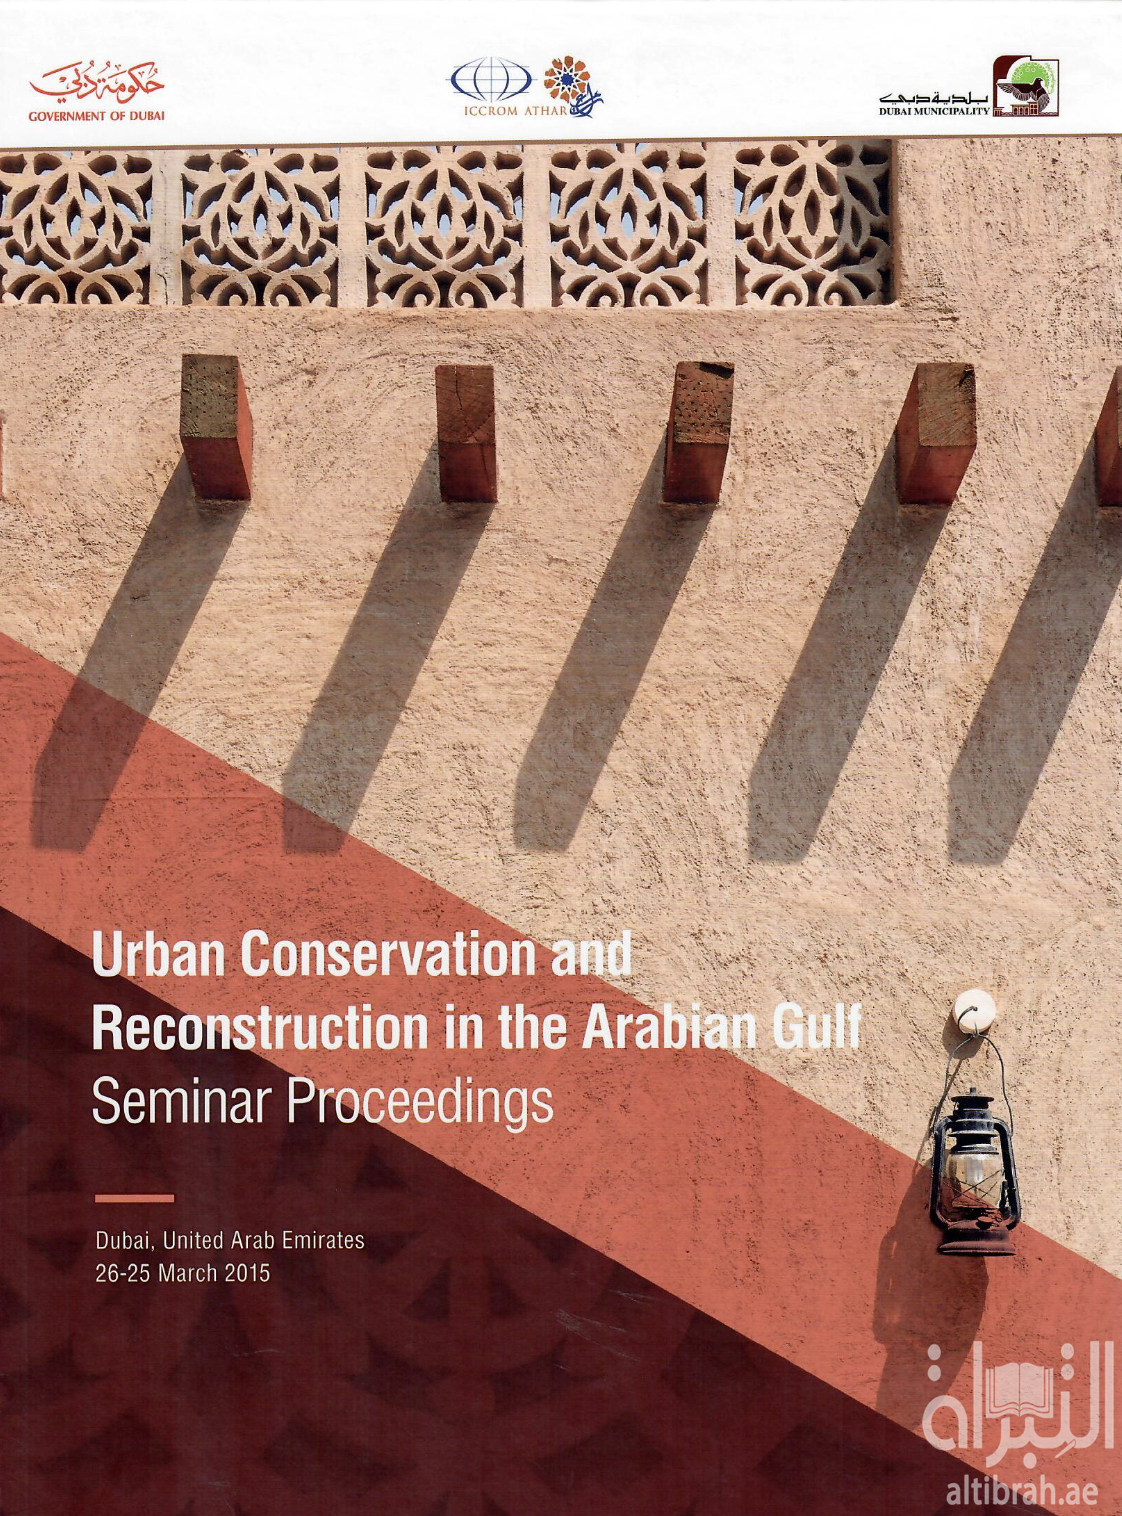 Urban conservation and reconstruction in the Arabian Gulf